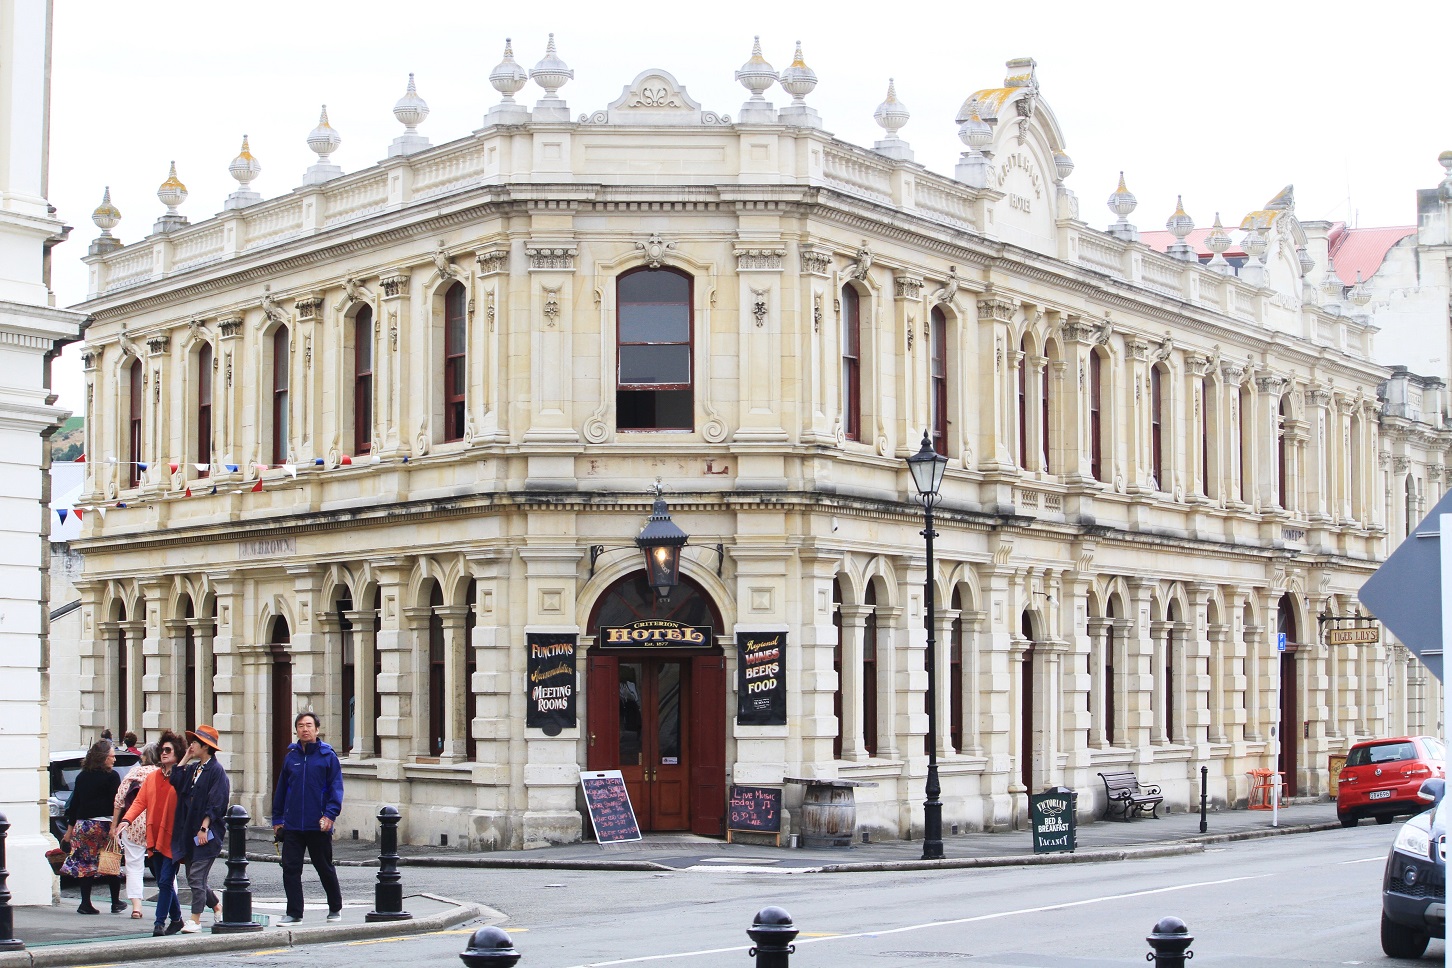 The 1877 Criterion Hotel, one of many historic buildings in Oamaru’s historic precinct preserved...